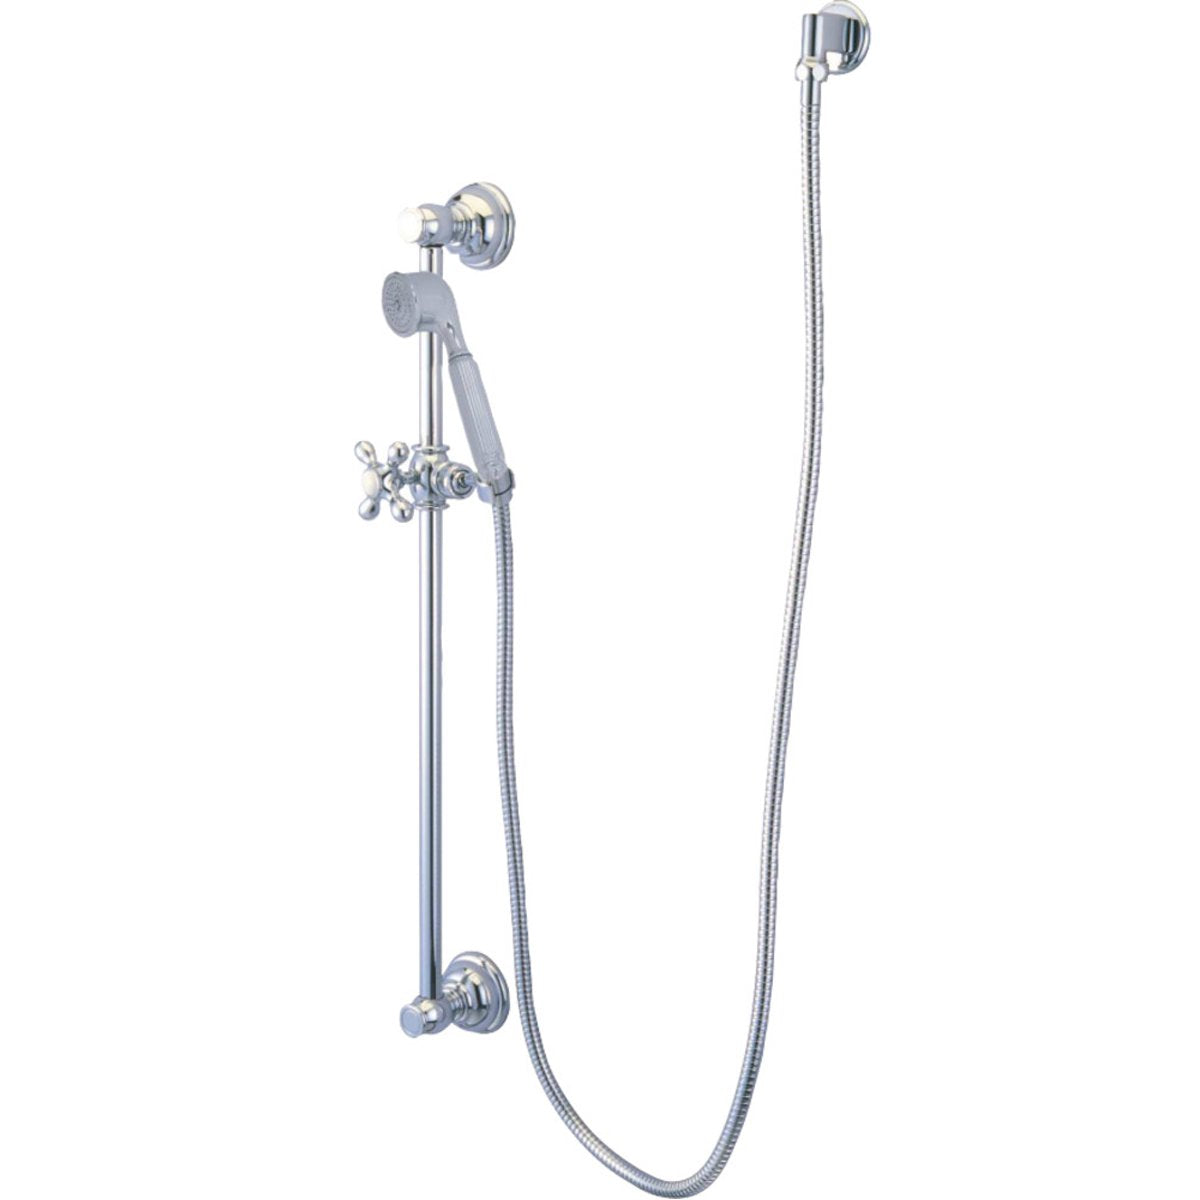 Shower Sets & Systems